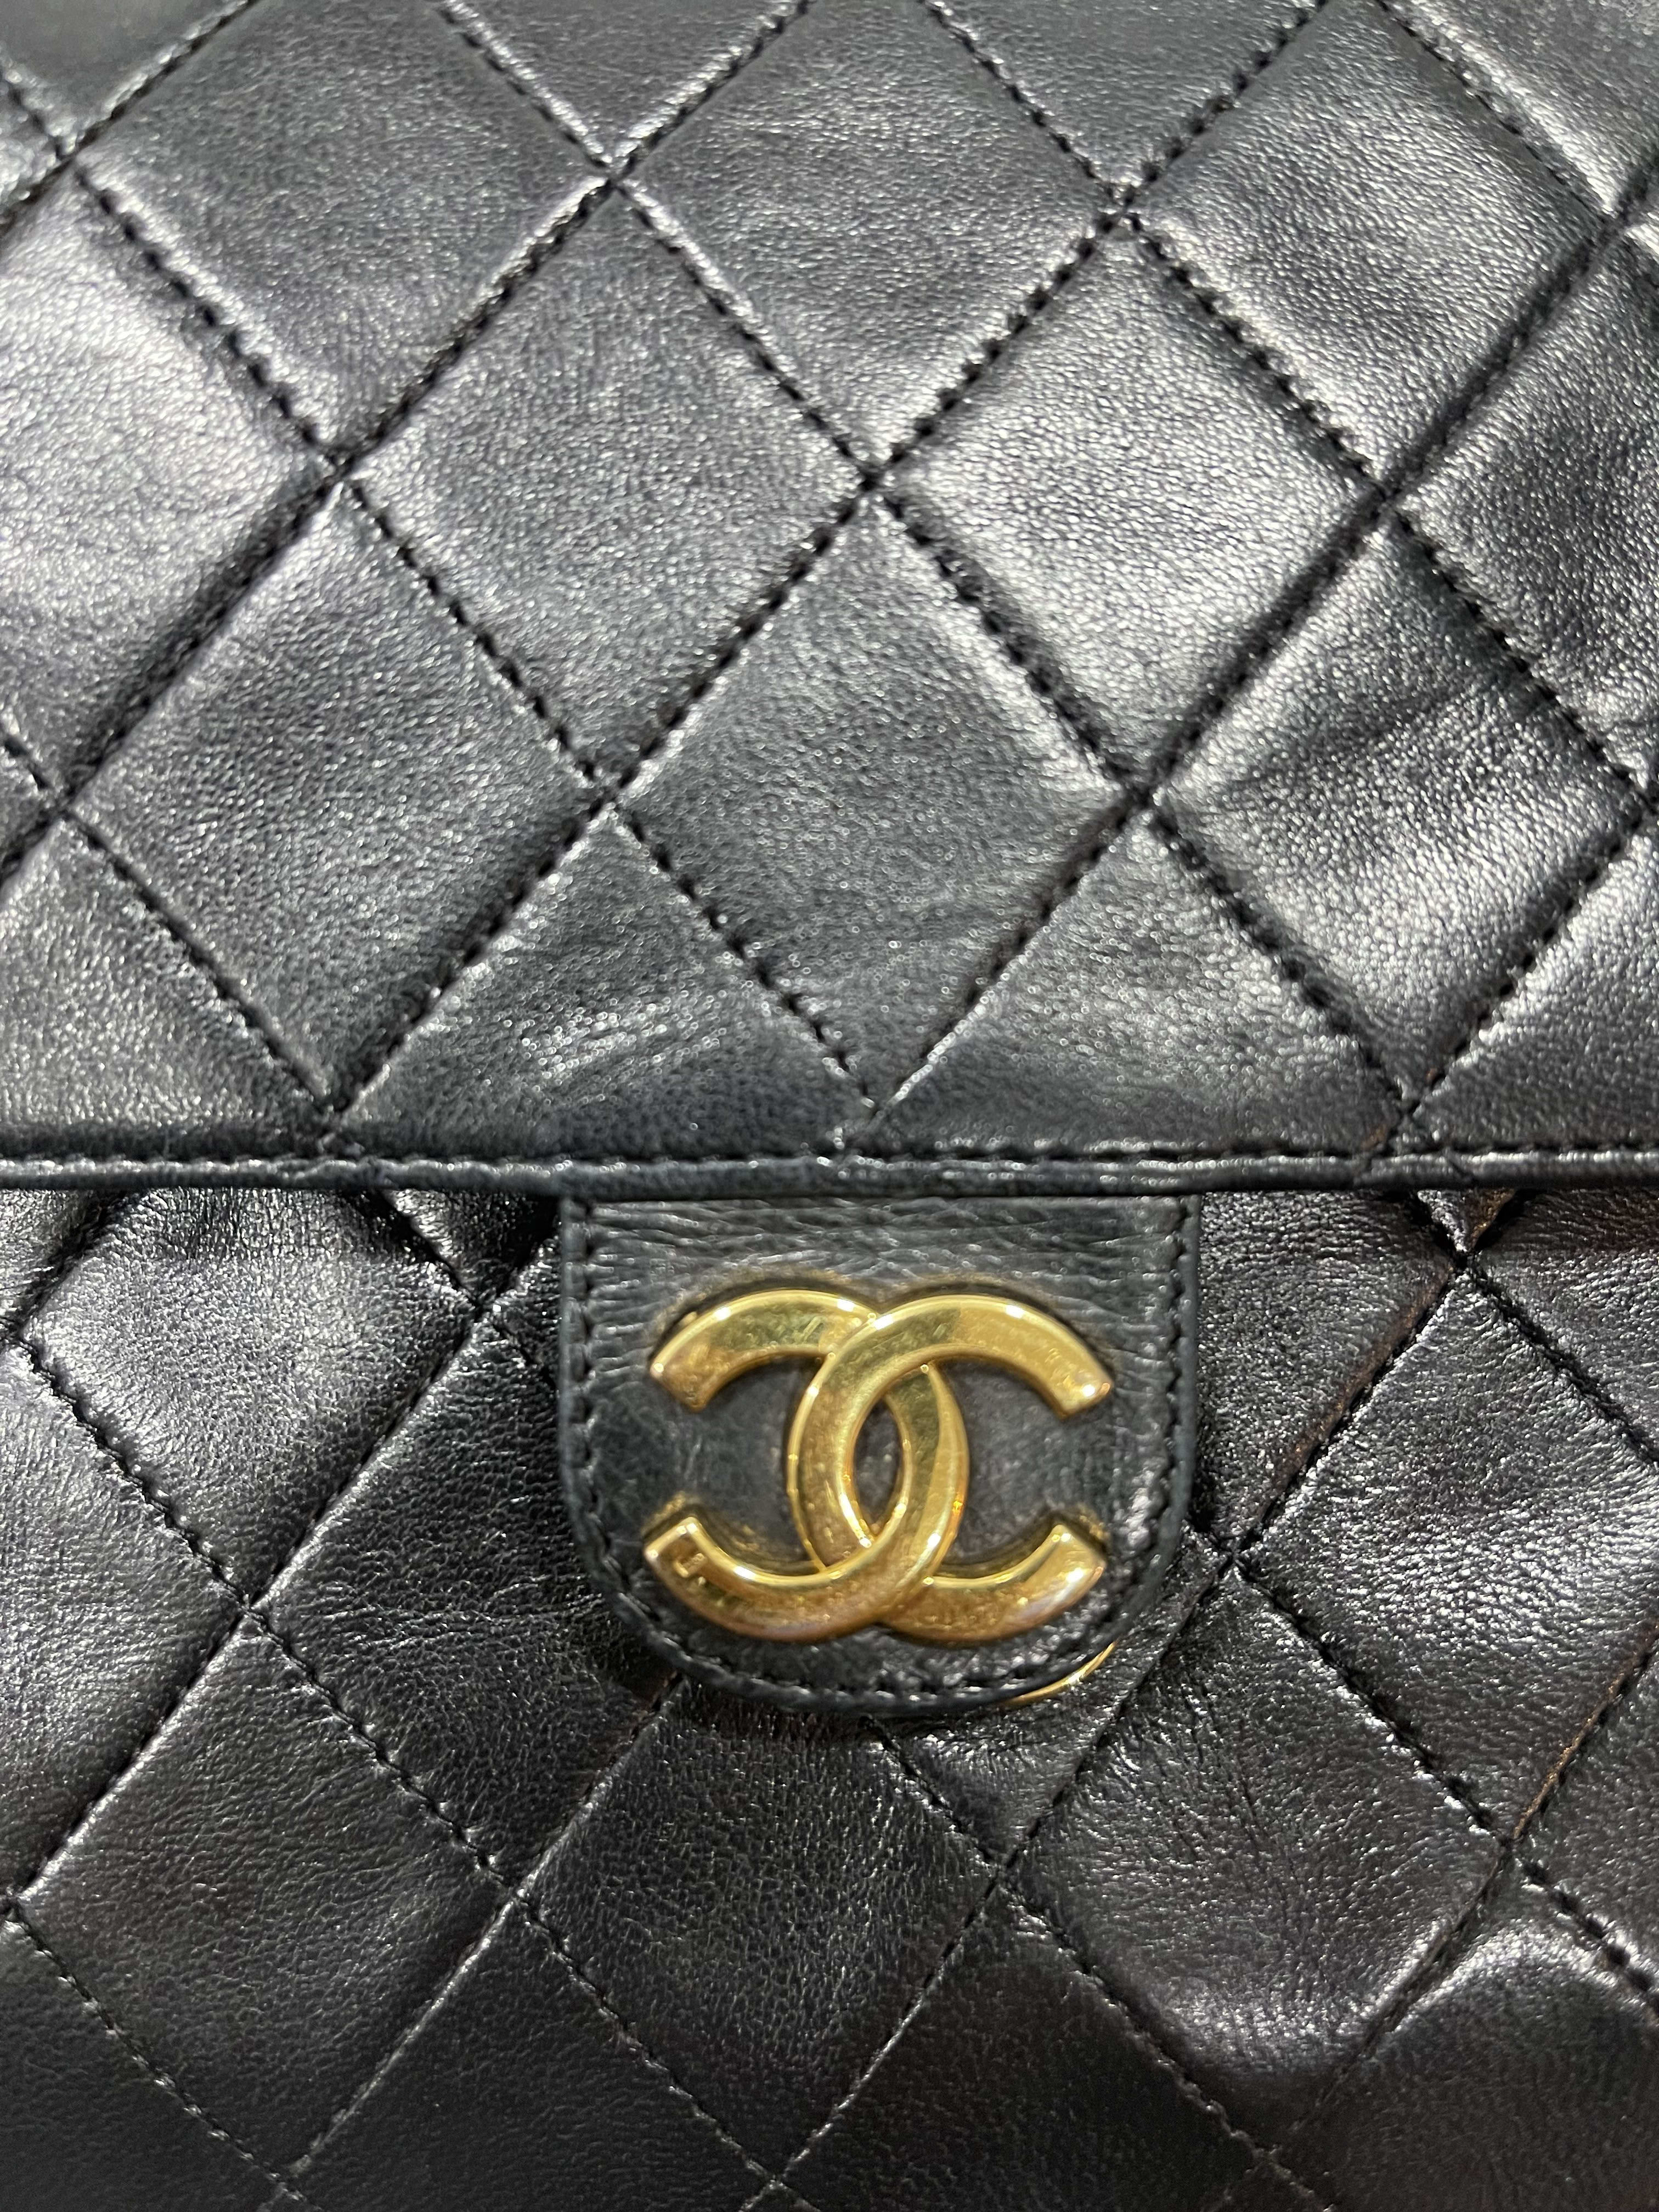 Chanel Black Quilted Leather Single Flap Chain Shoulder Bag (Authentic  Pre-Owned) - ShopStyle